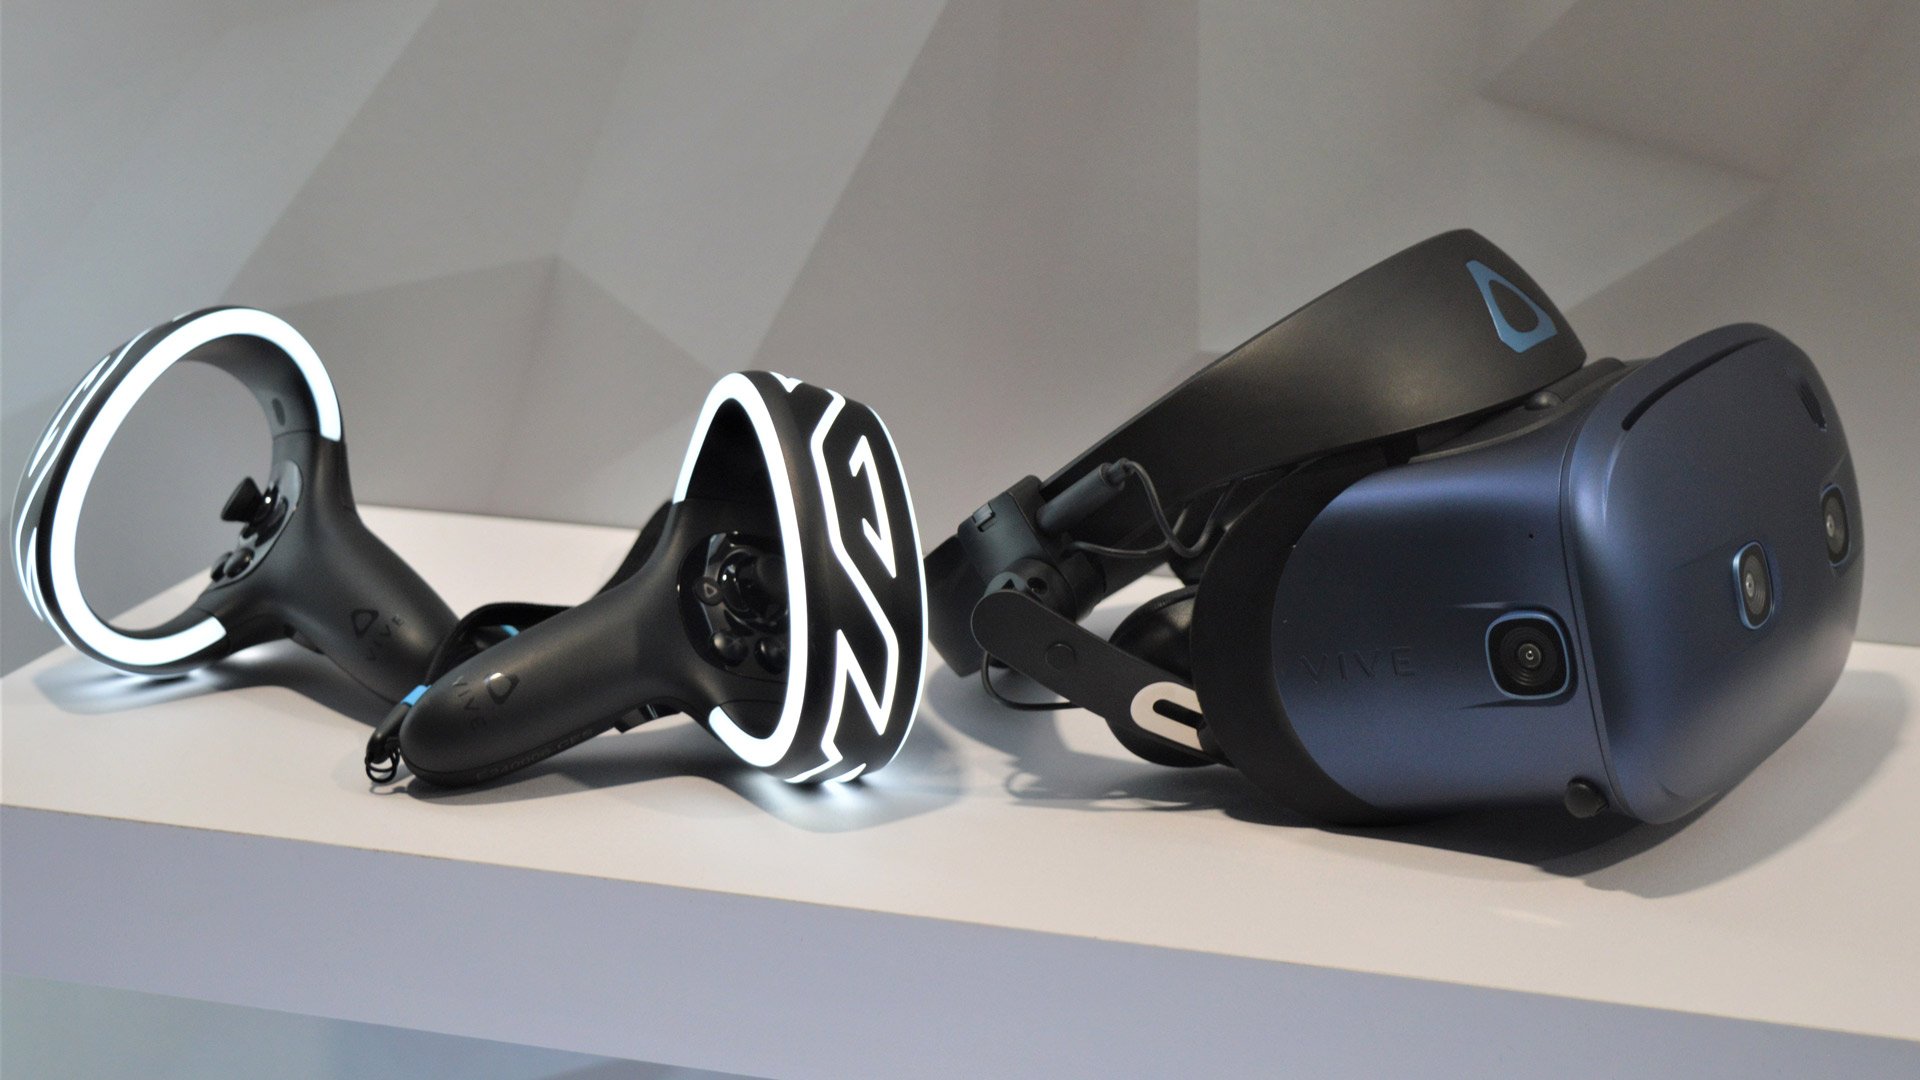 What is? HTC VIVE Cosmos virtual reality glasses.